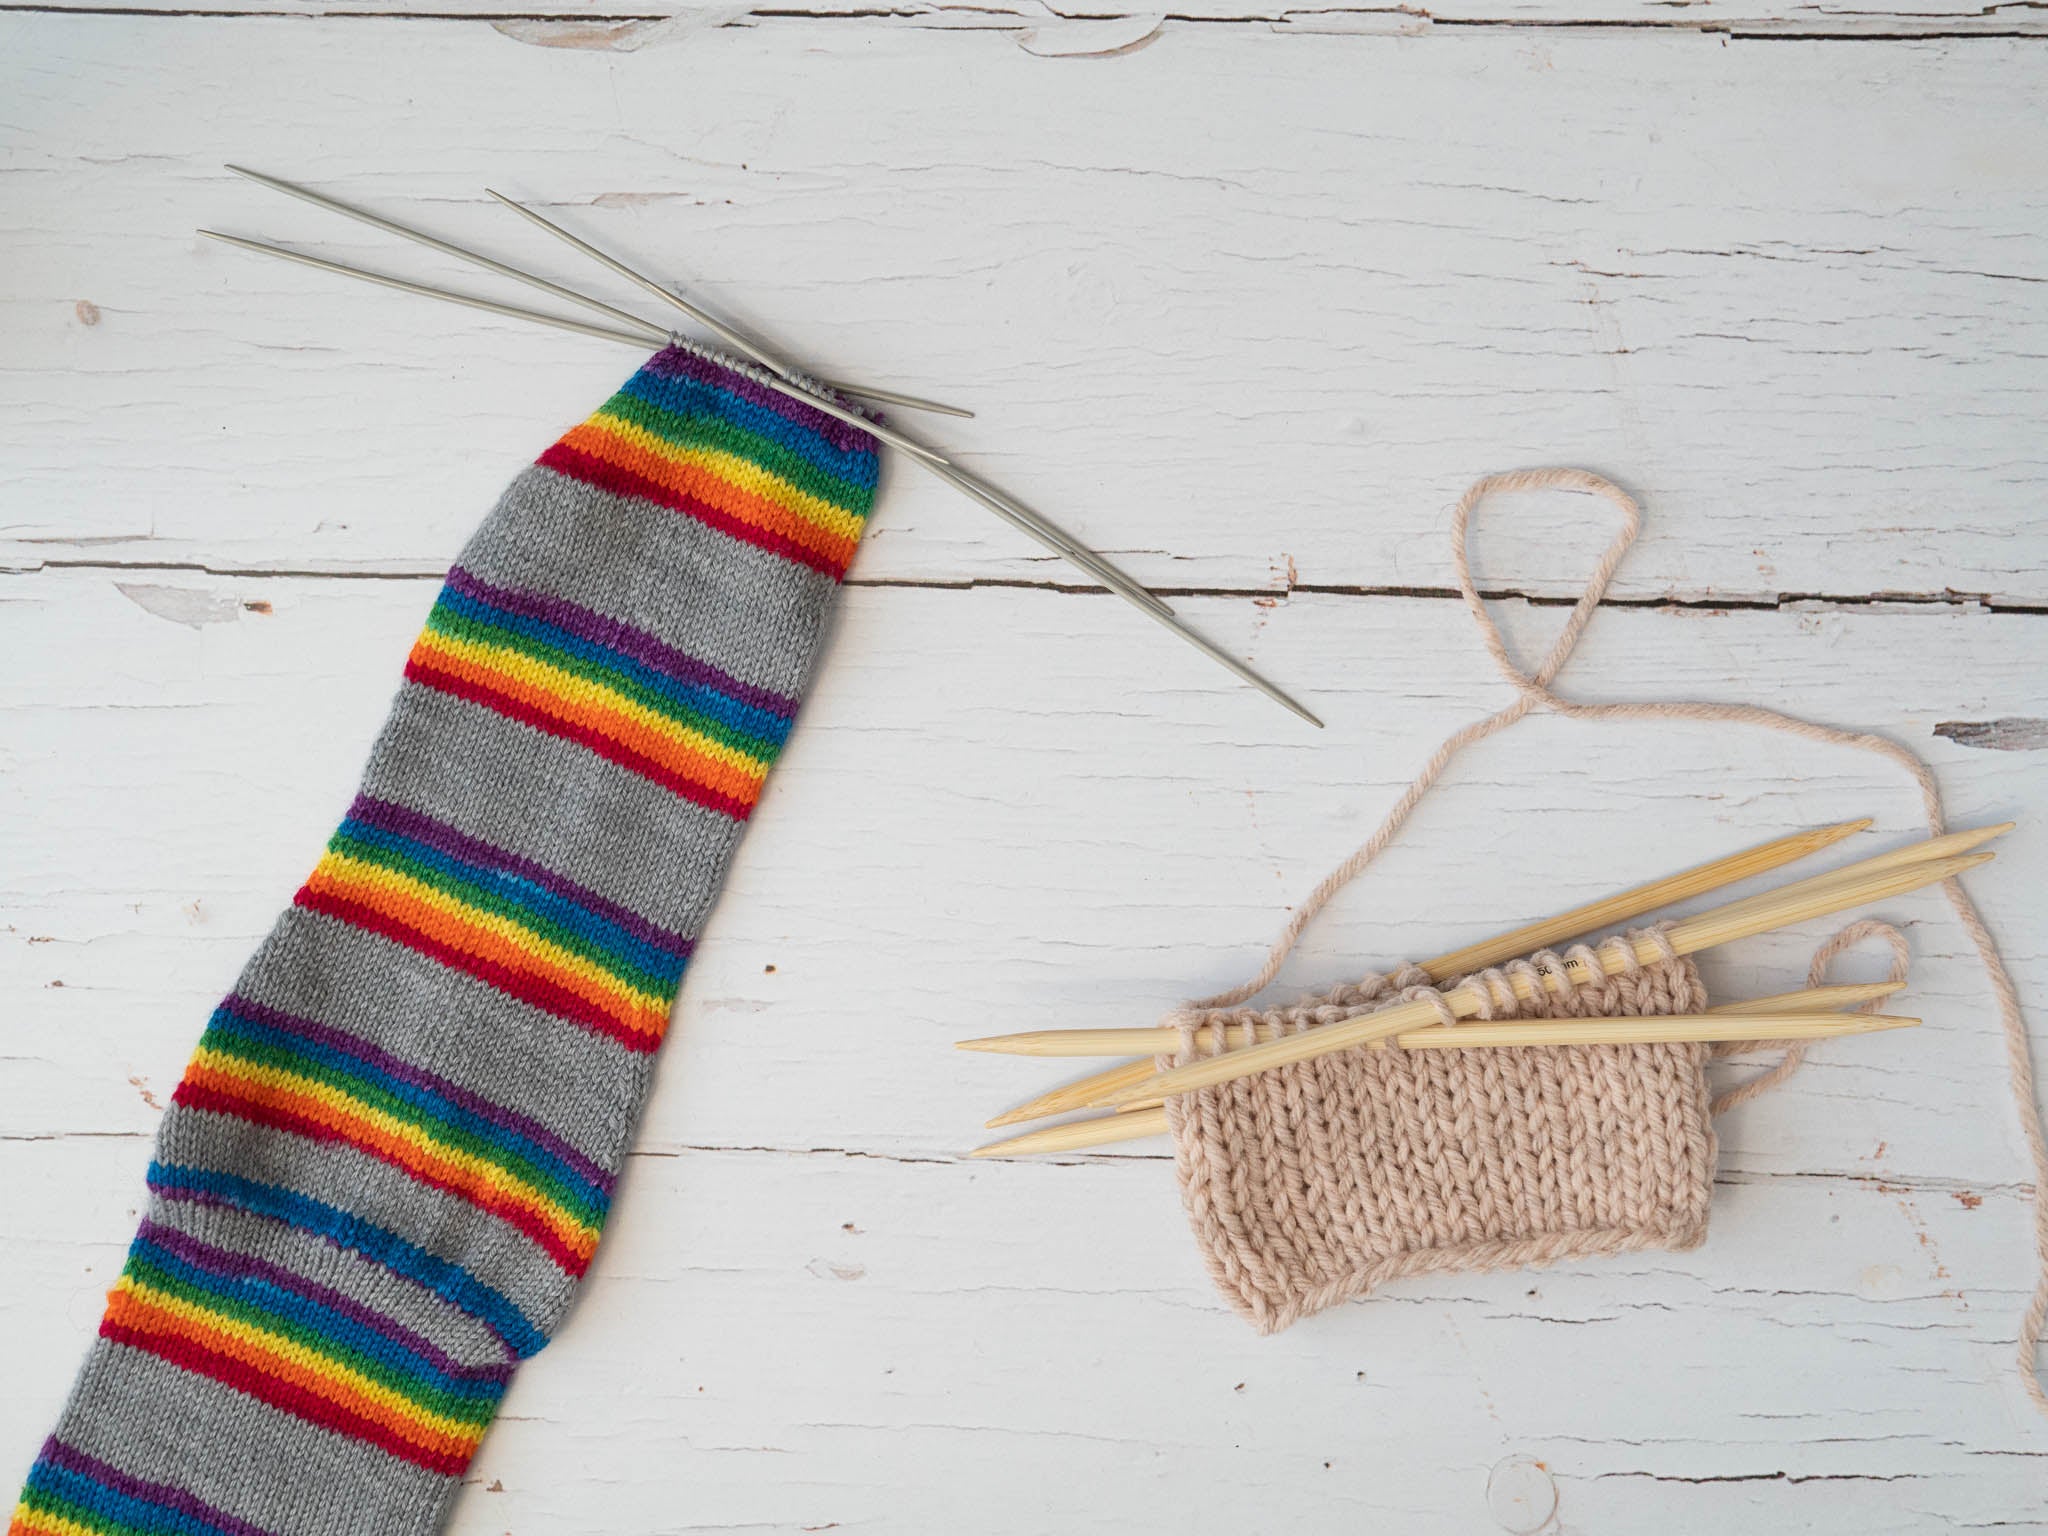 Learn to knit: How to knit in the round with double pointed needles - Ysolda